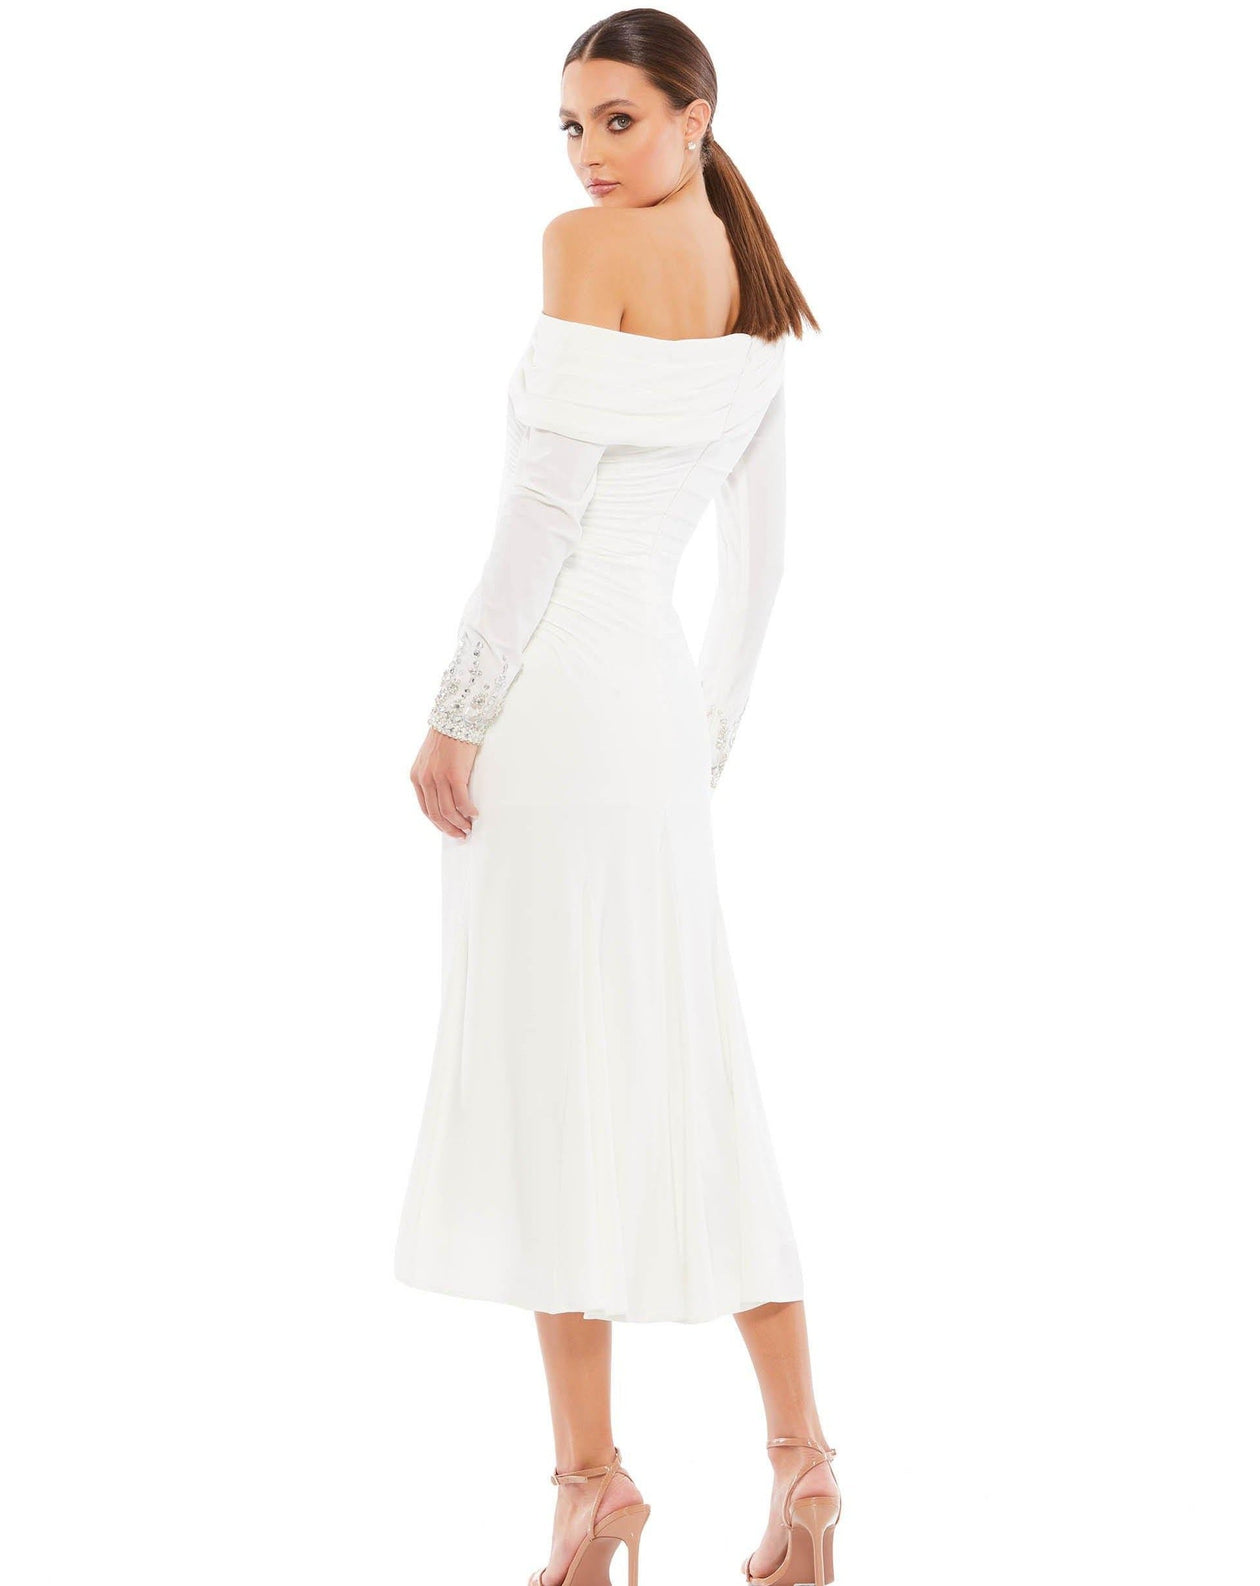 White Mac Duggal 26485 Foldover Long Sleeve Jeweled Midi Dress for $179.0 –  The Dress Outlet